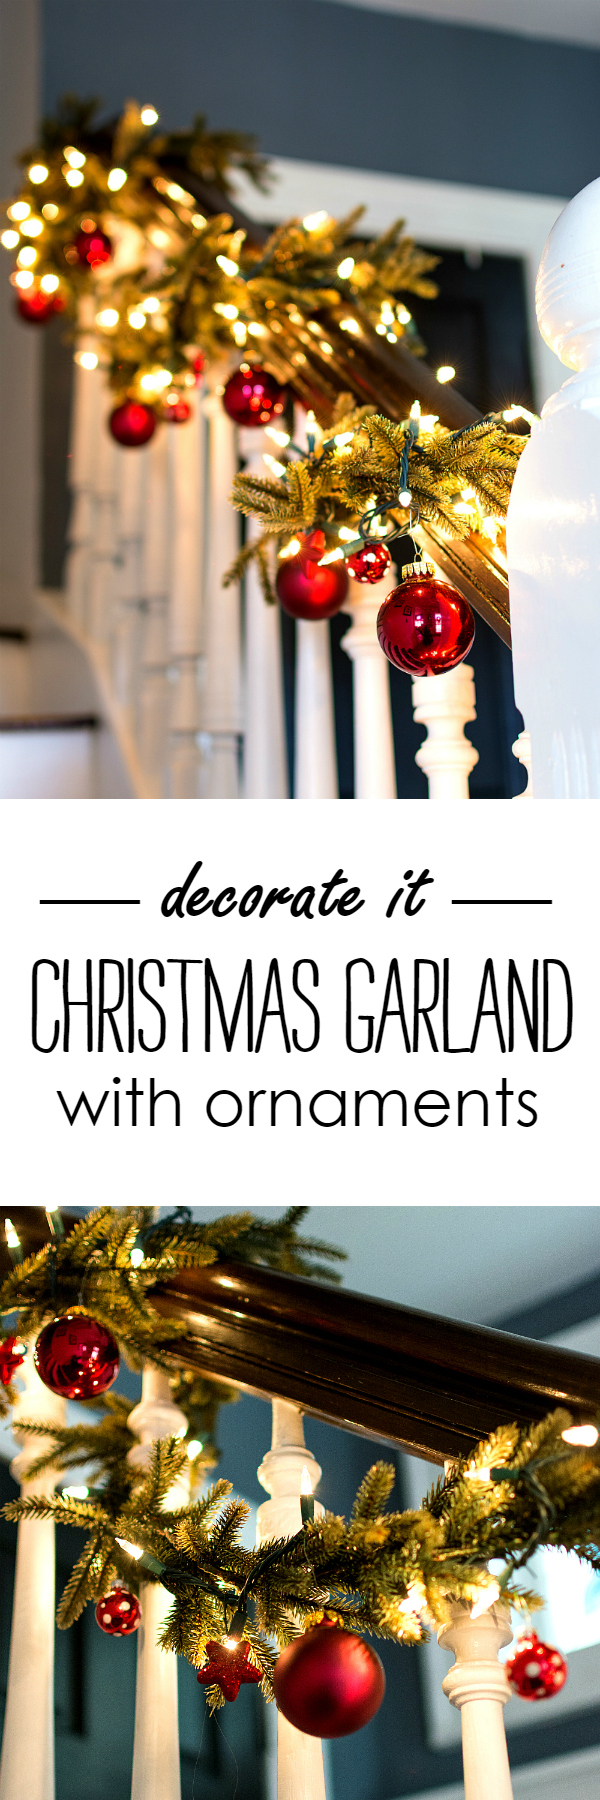 Christmas Decorating Ideas with Garland